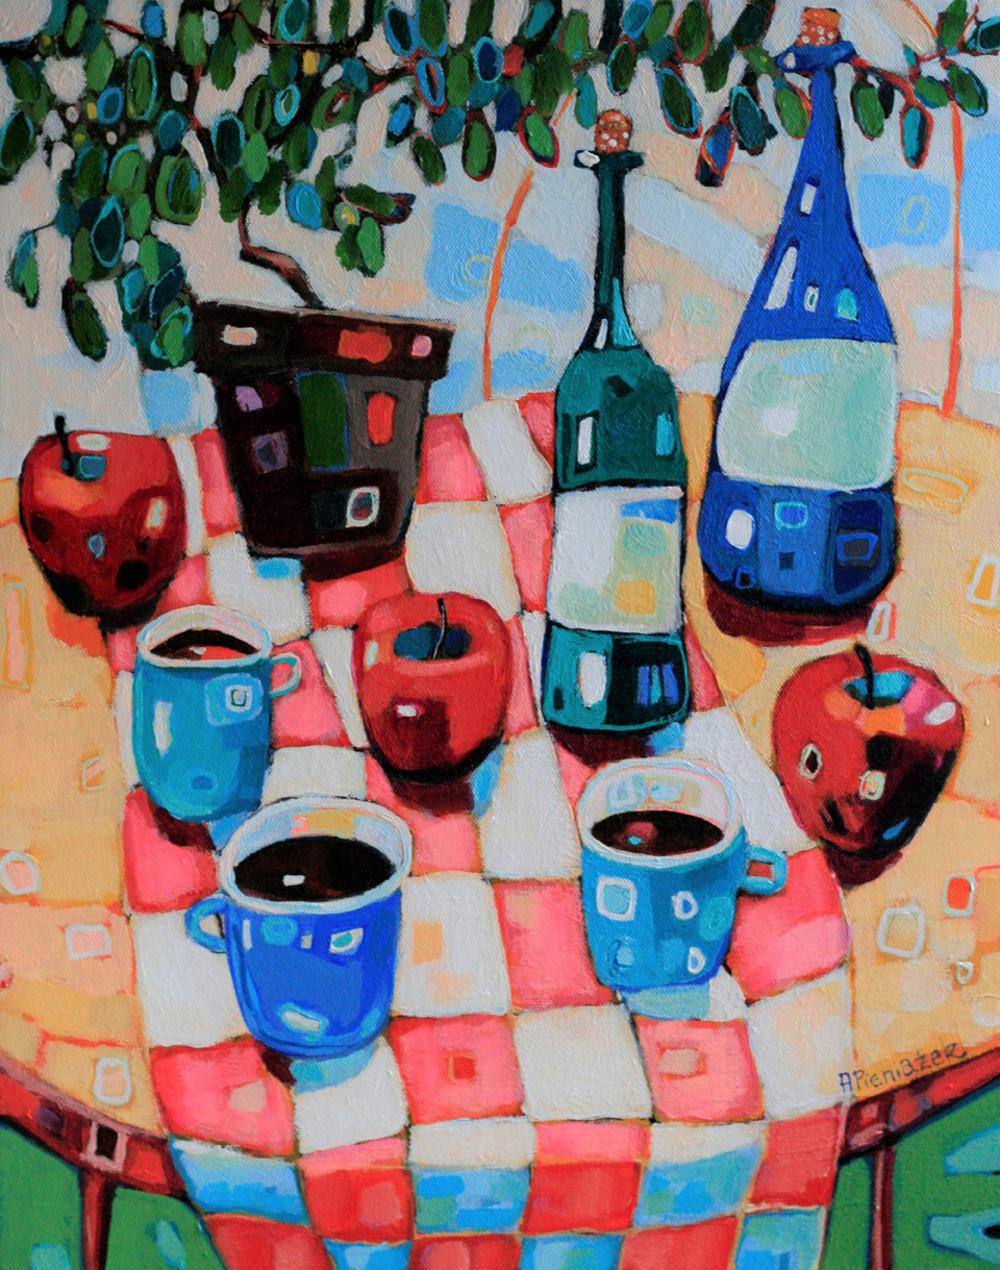 Still Life with Apples & Coffee - Colourful Interior Scene: Acrylic on Canvas